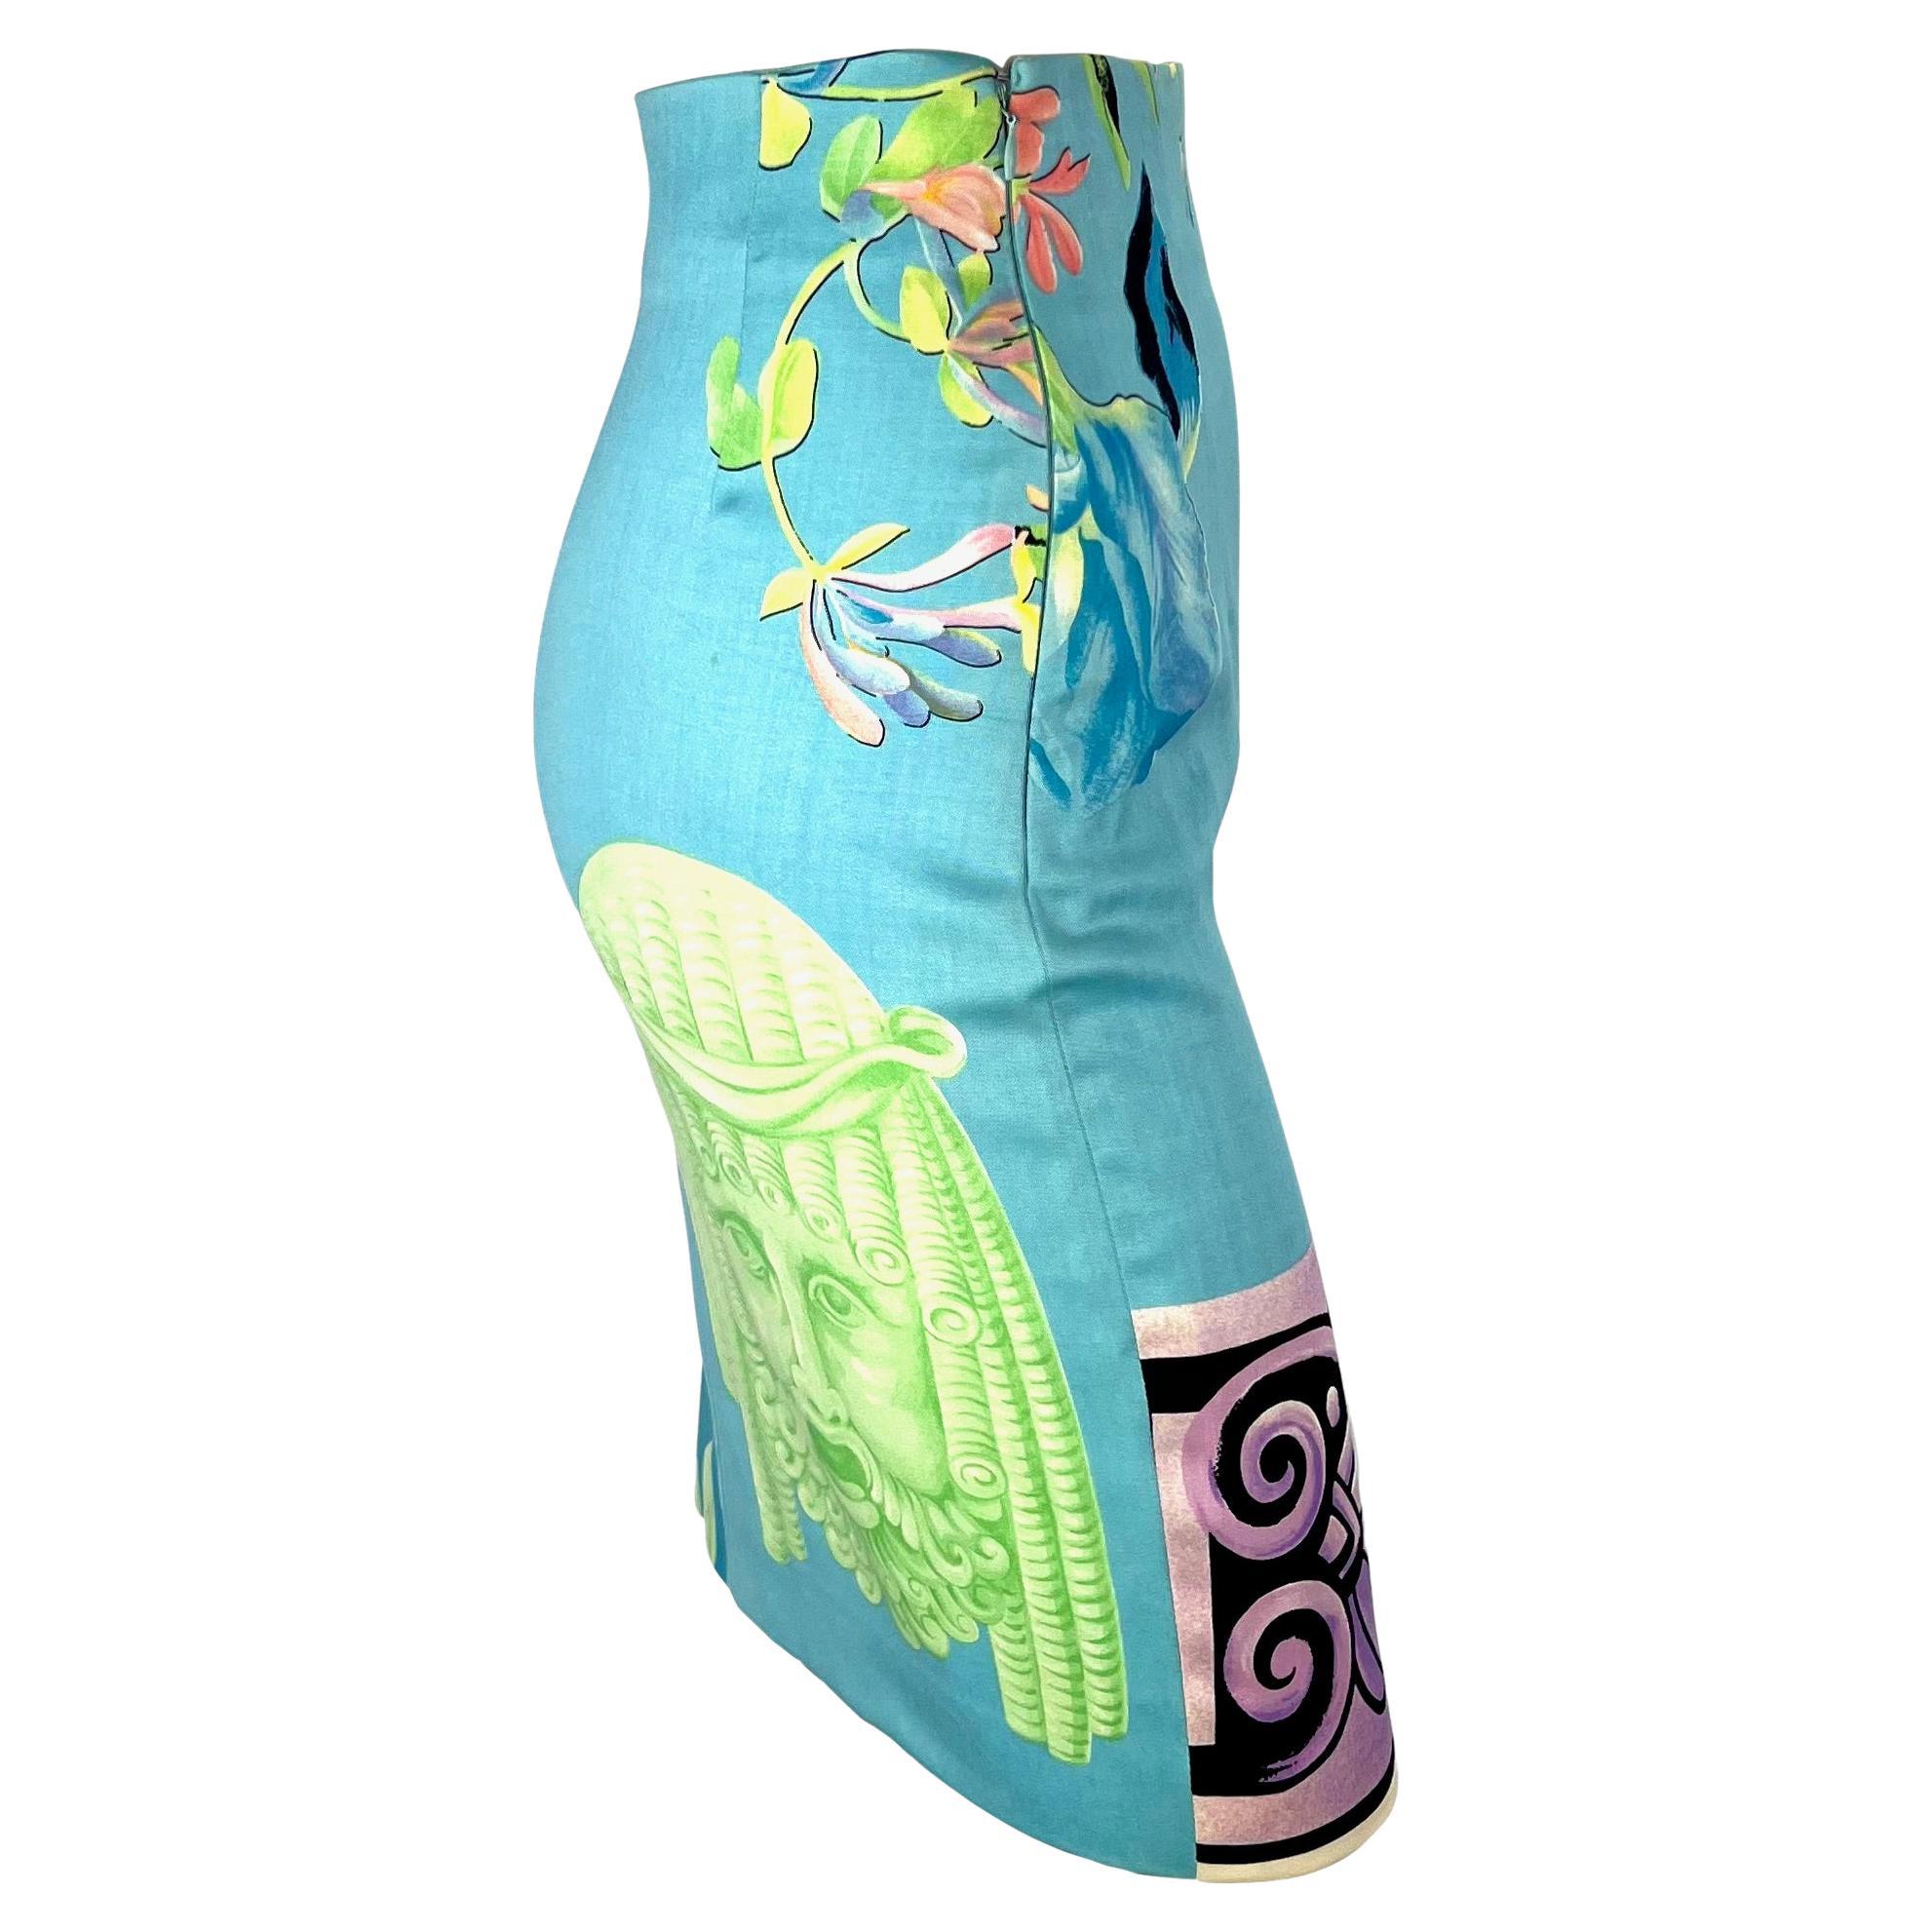 S/S 1992 Gianni Versace Couture Pastel Floral Mask Print Blue Pencil Skirt For Sale 1